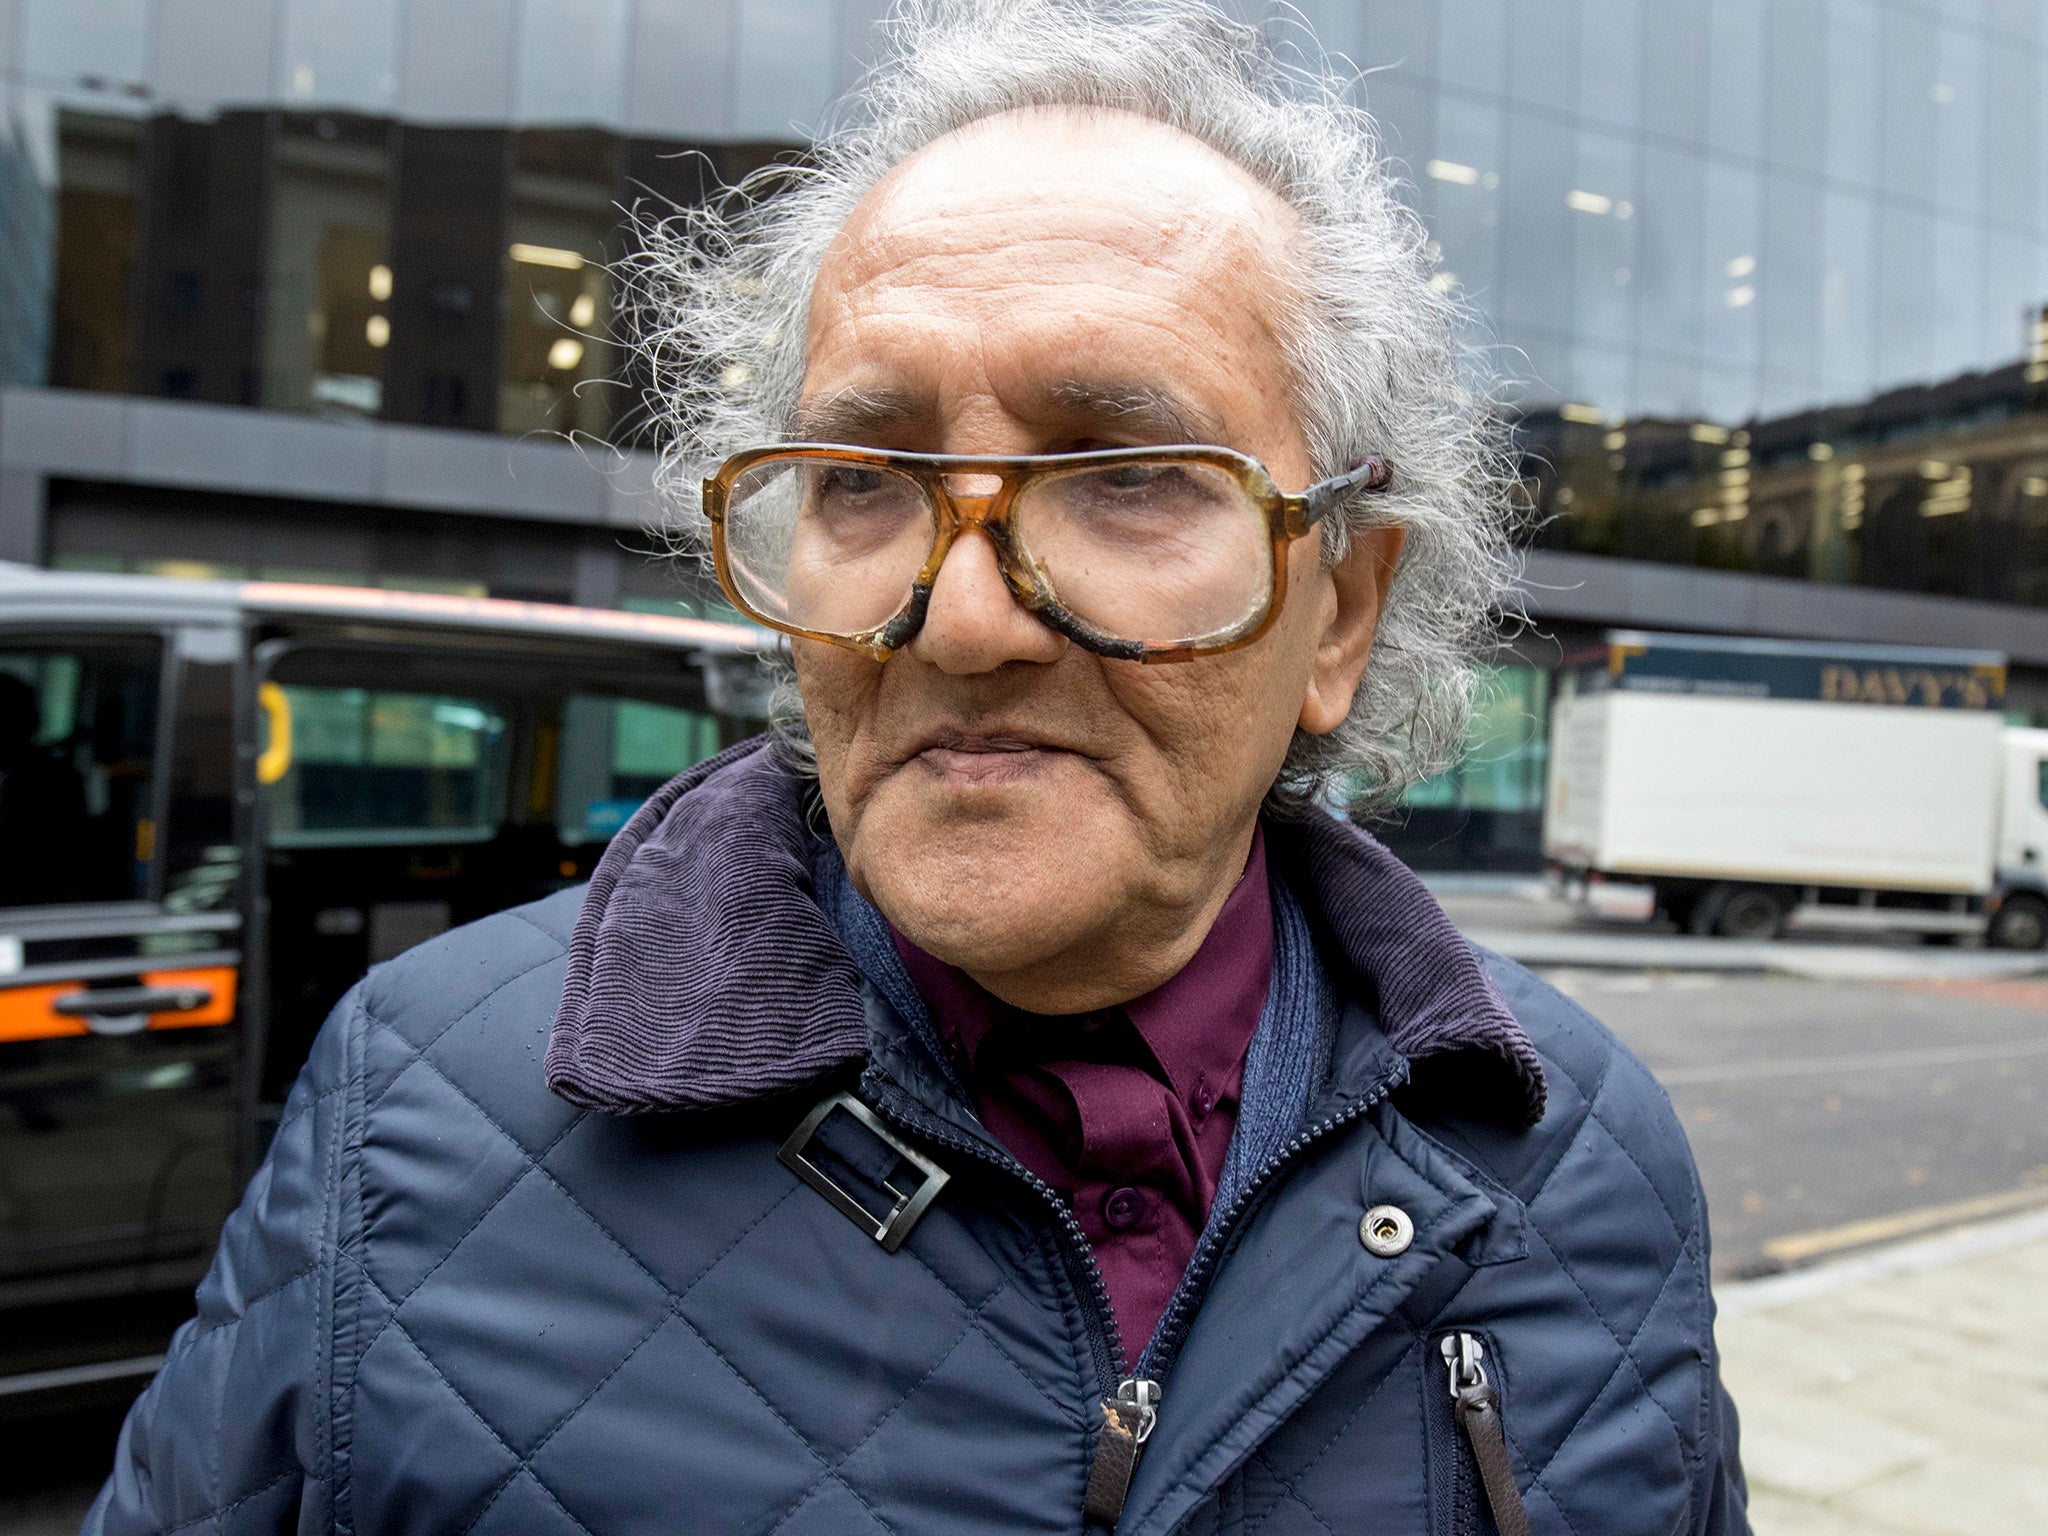 Aravindan Balakrishnan, a former Maoist Cult leader, is charged with 25 historical offences, including rape, false imprisonment, assault and child cruelty over allegations he kept 3 women as slaves at a flat in Brixton